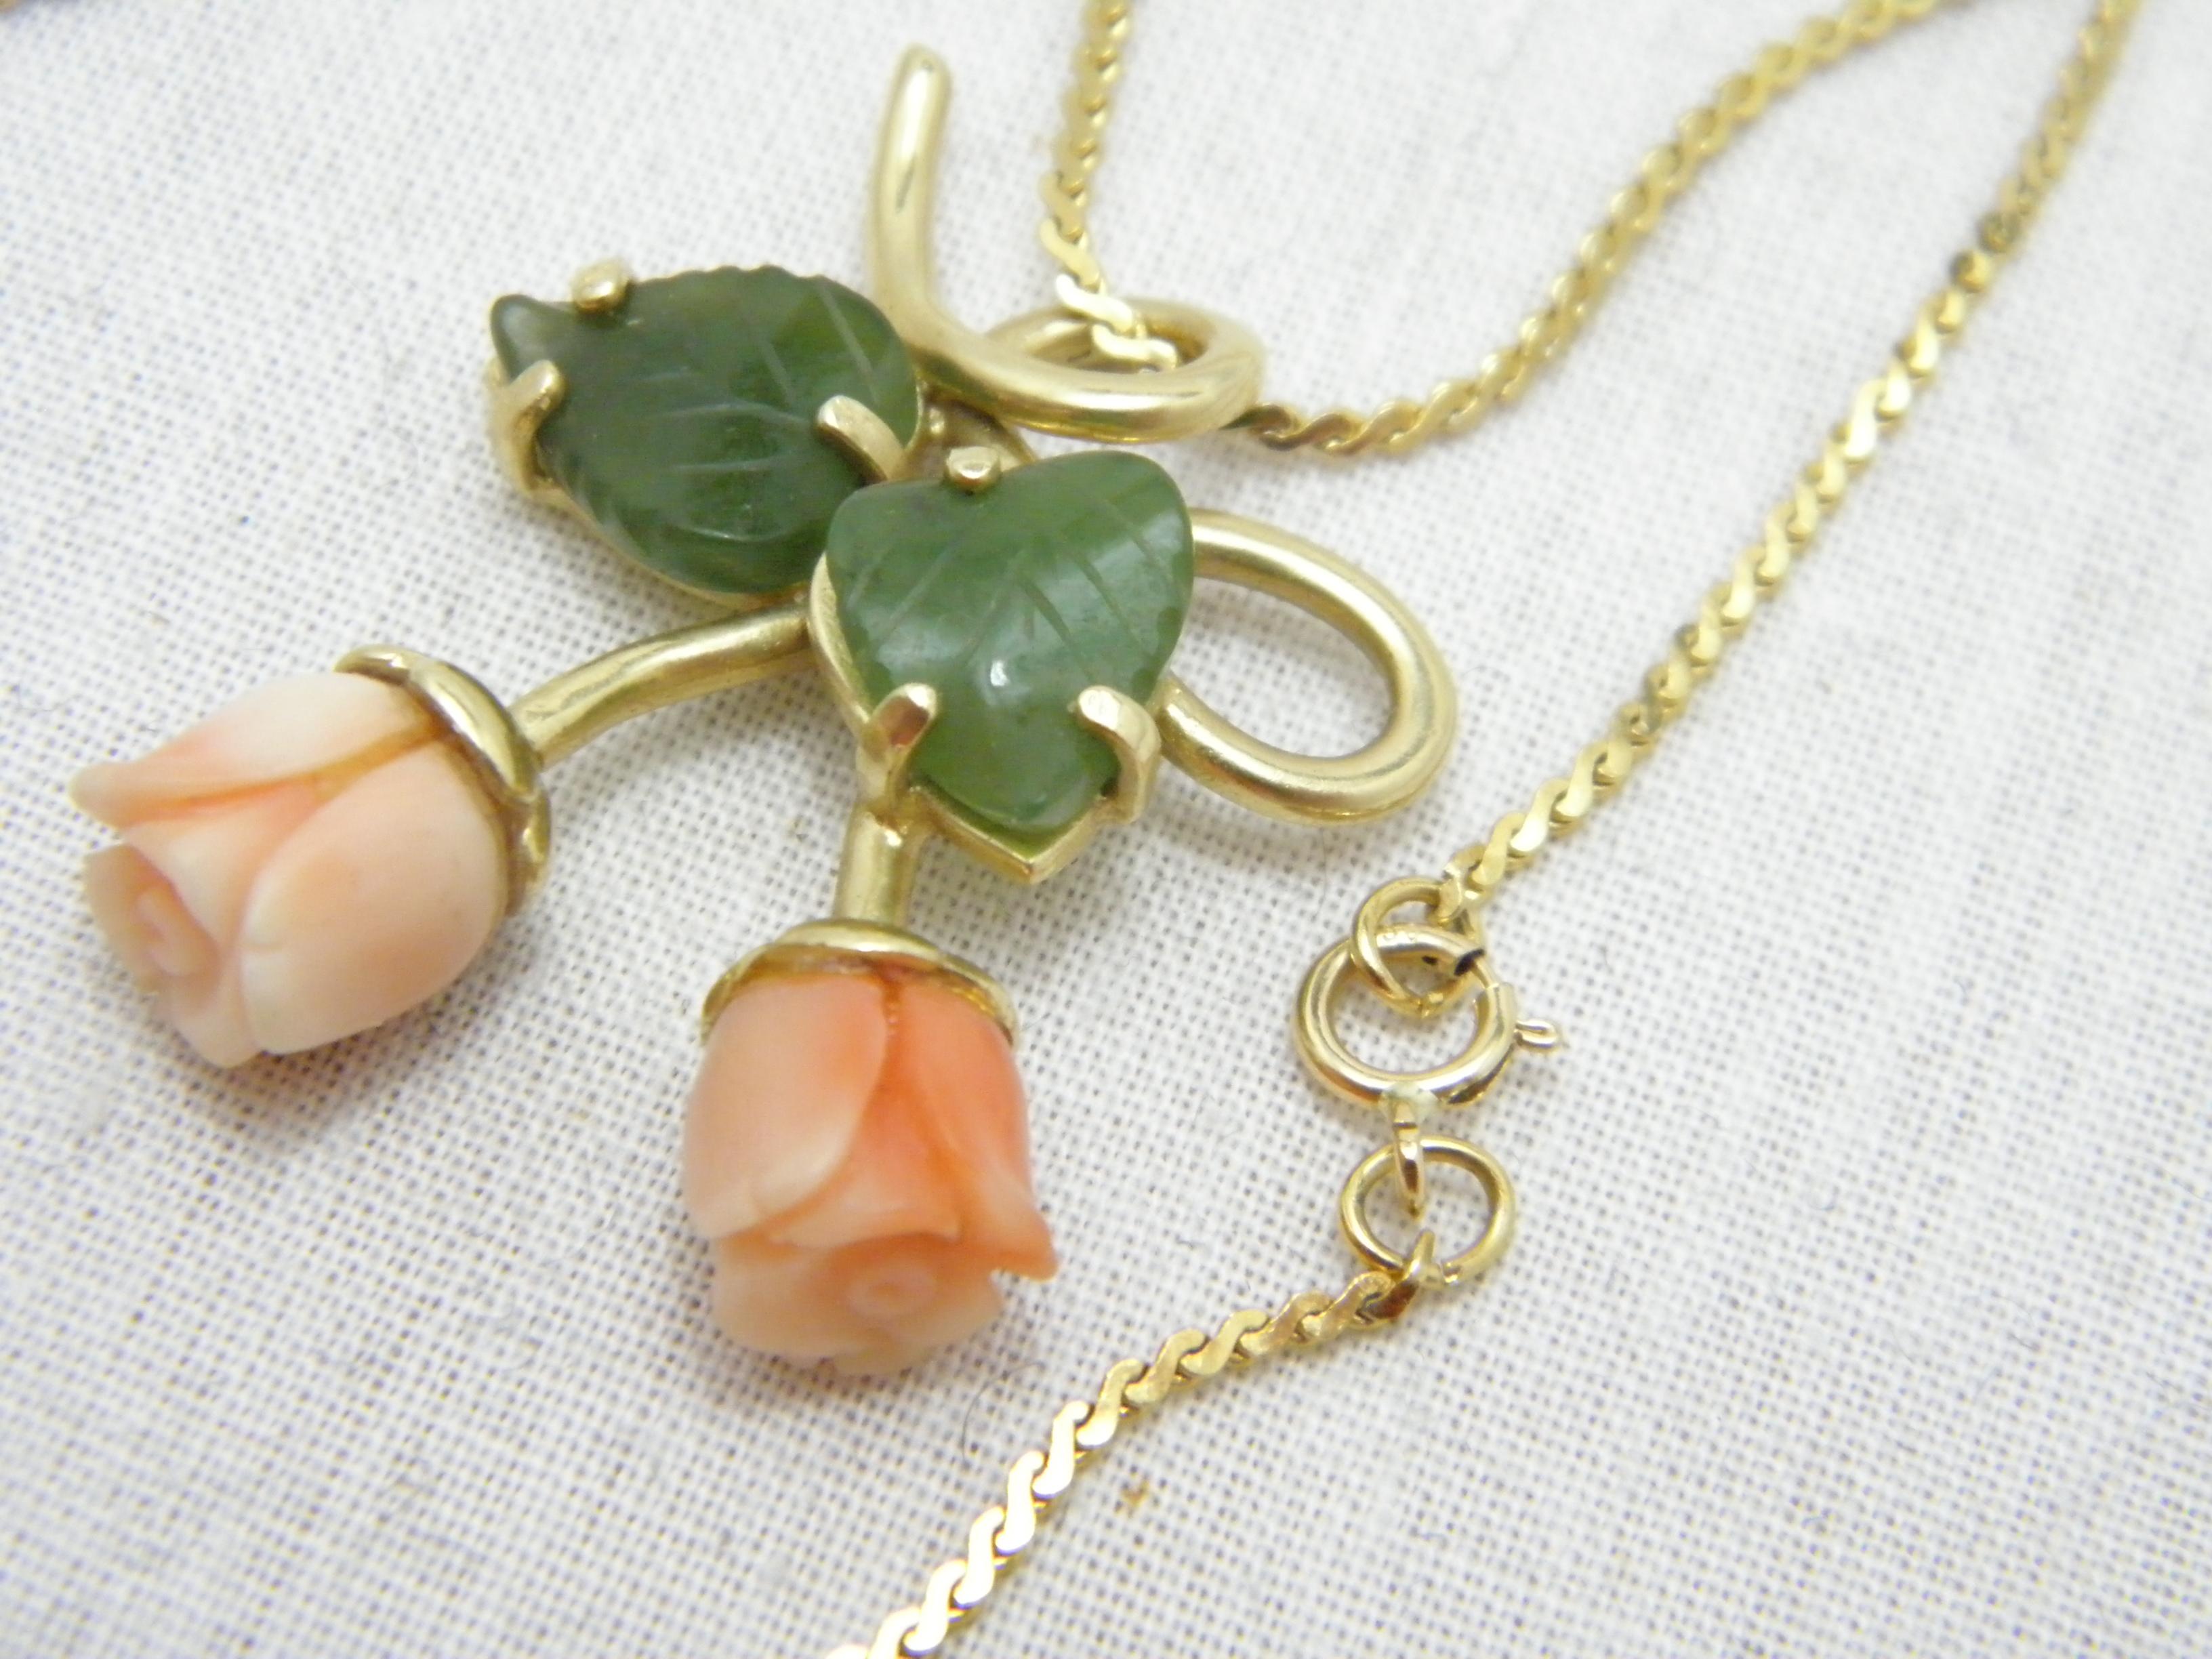 Antique 14ct Gold Jade Coral Roses Pendant Necklace Byzantine Chain 585 28 Inch For Sale 3